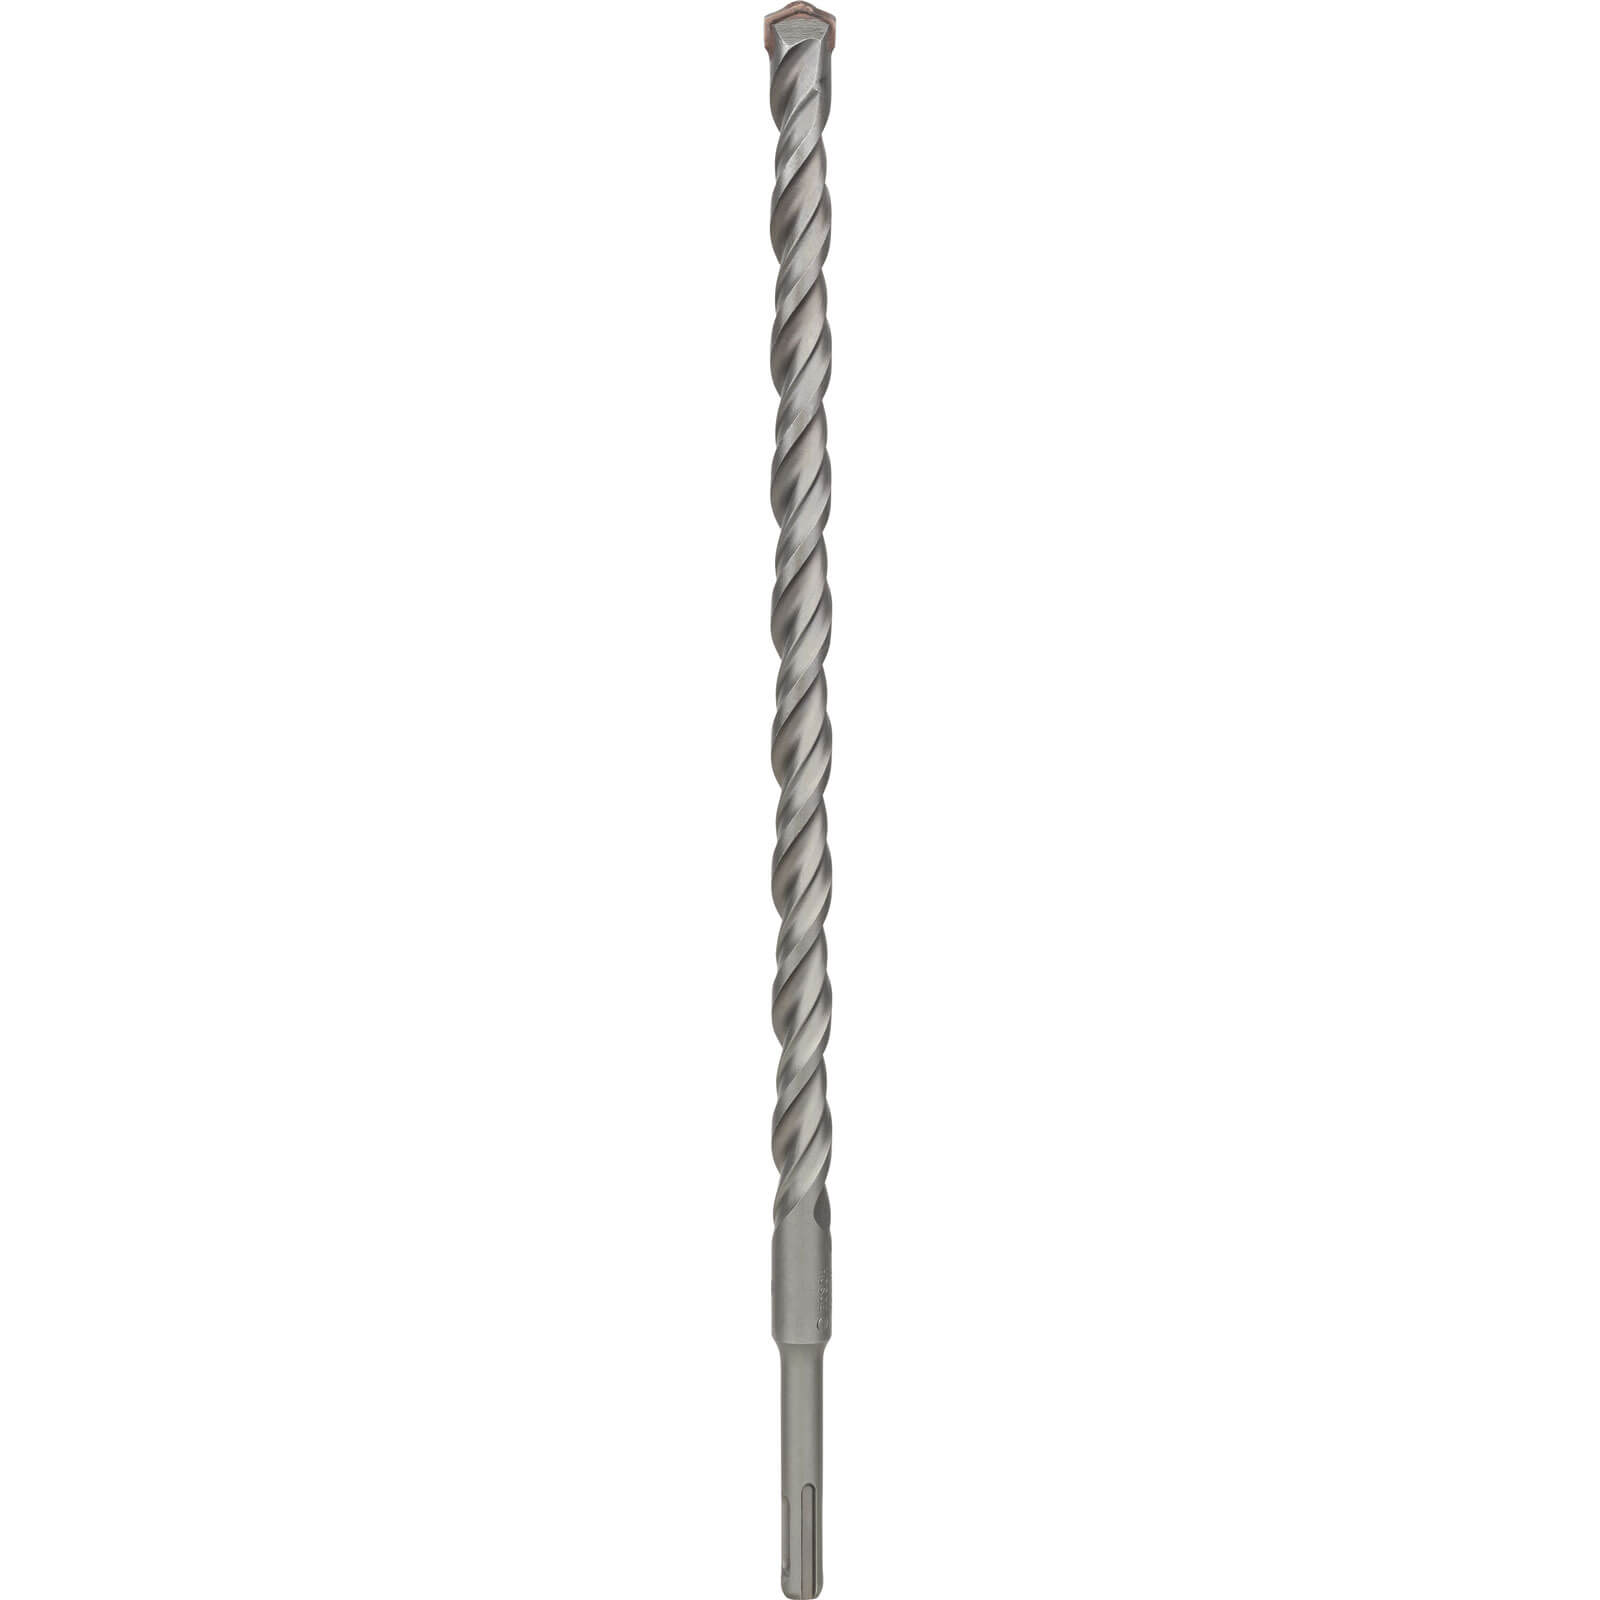 Image of Bosch Series 3 SDS Plus Masonry Drill Bit 16mm 360mm Pack of 1